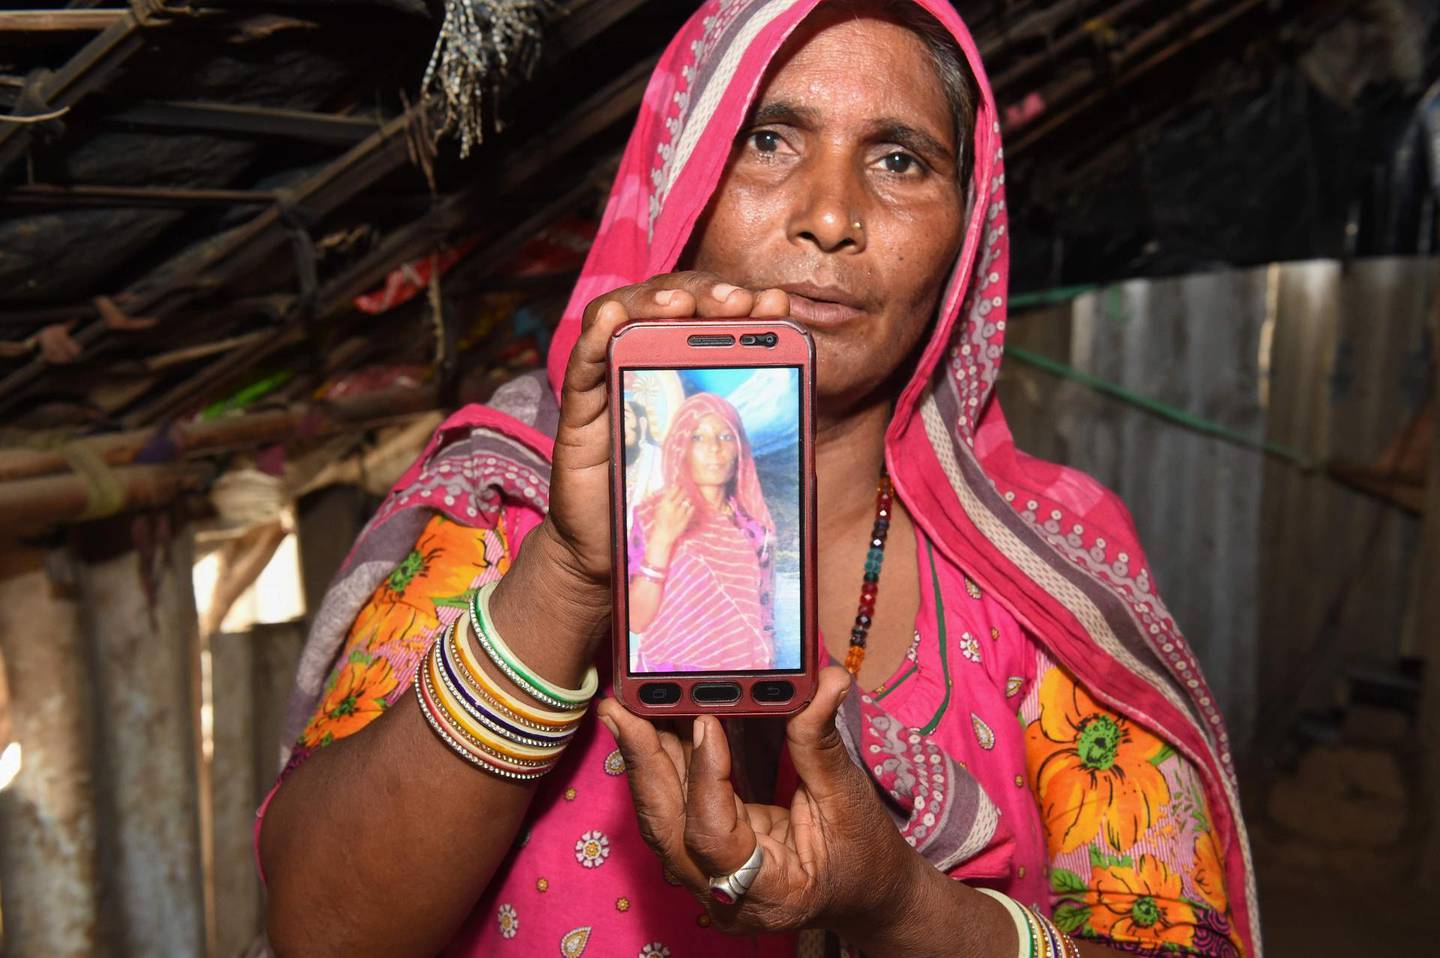 Mohinidevi Nath displays a photo on a mobile phone of her cousin Shantadevi Nath, who was killed by a mob that falsely believed she was intent on abducting children, on the outskirts of Ahmedabad in India's western Gujarat state on June 27, 2018. Indian police urged people on June 27 not to believe false rumours spread on WhatsApp after a woman was killed and a dozen hurt in the latest mob attacks to leave authorities looking powerless. / AFP / SAM PANTHAKY
